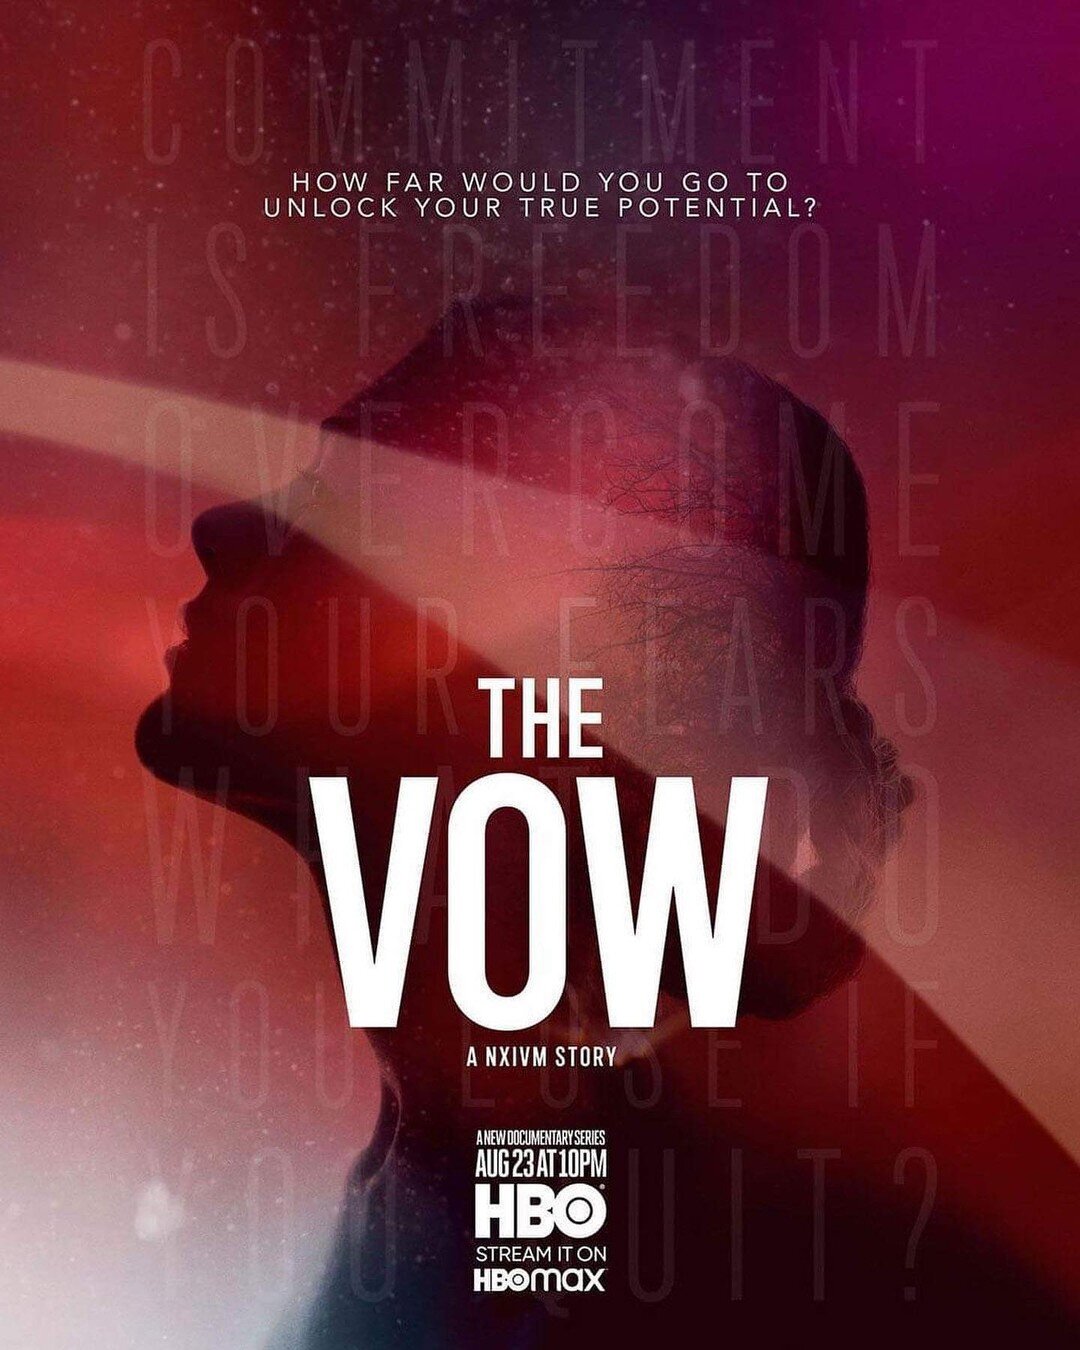 Skin Deep director of photography, Sam Price-Waldman, has a new series premiering on HBO tonight. Sam spent 3 years as the DP on this series and if the trailer at https://youtu.be/31rSR0w0z30 is any indication, THE VOW should be a deeply affecting pi